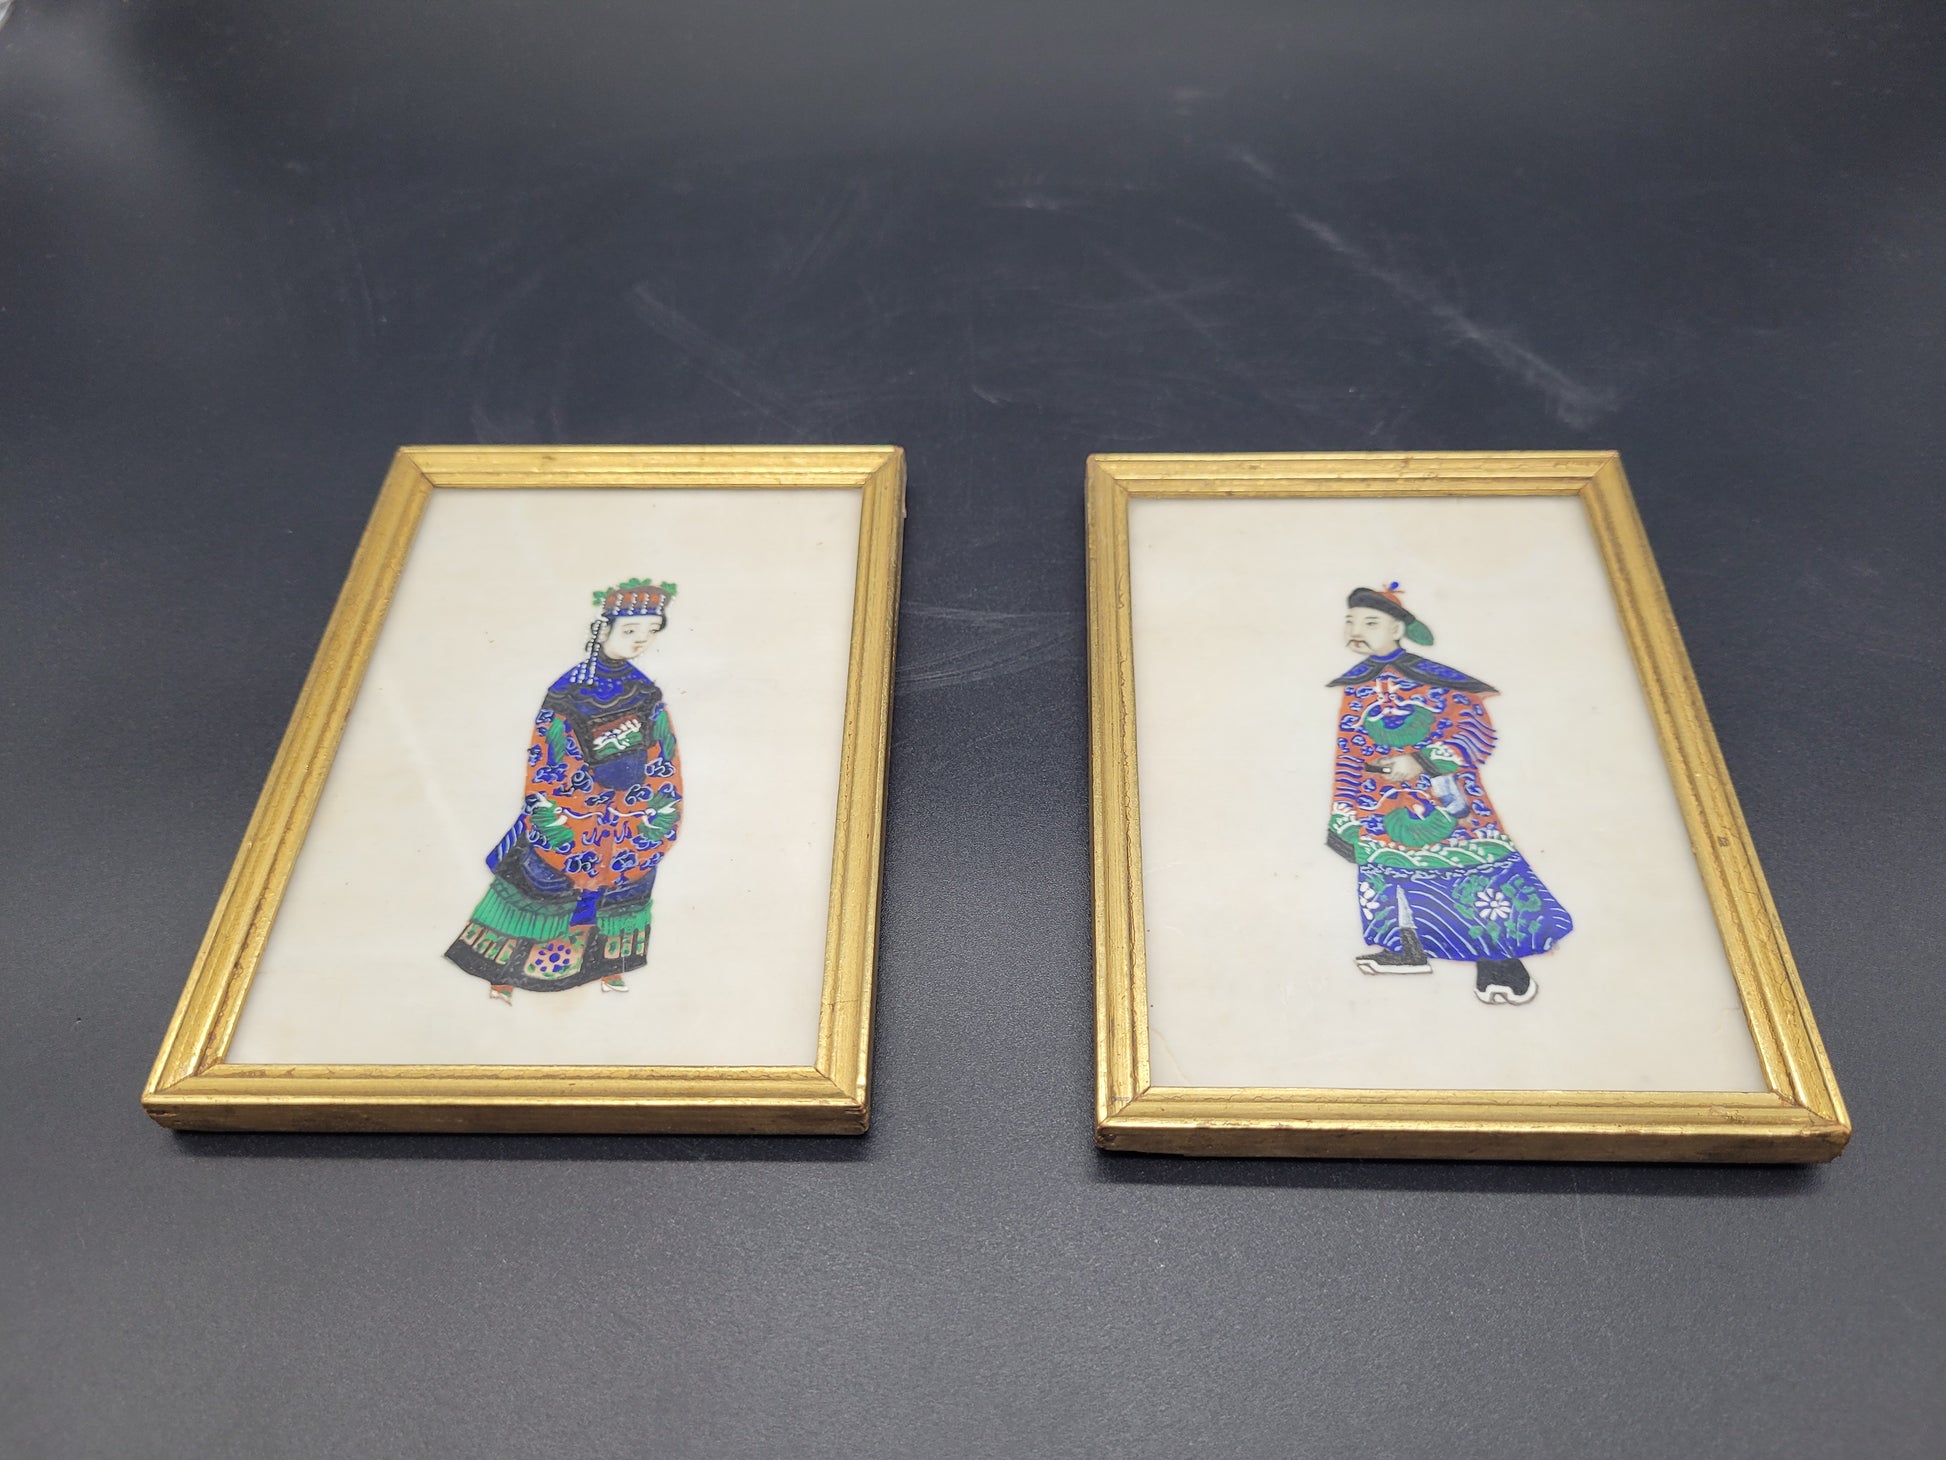 Two very well painted and nicely framed paintings on Pith / Rice Paper of a man and women in Traditional Chinese dress.